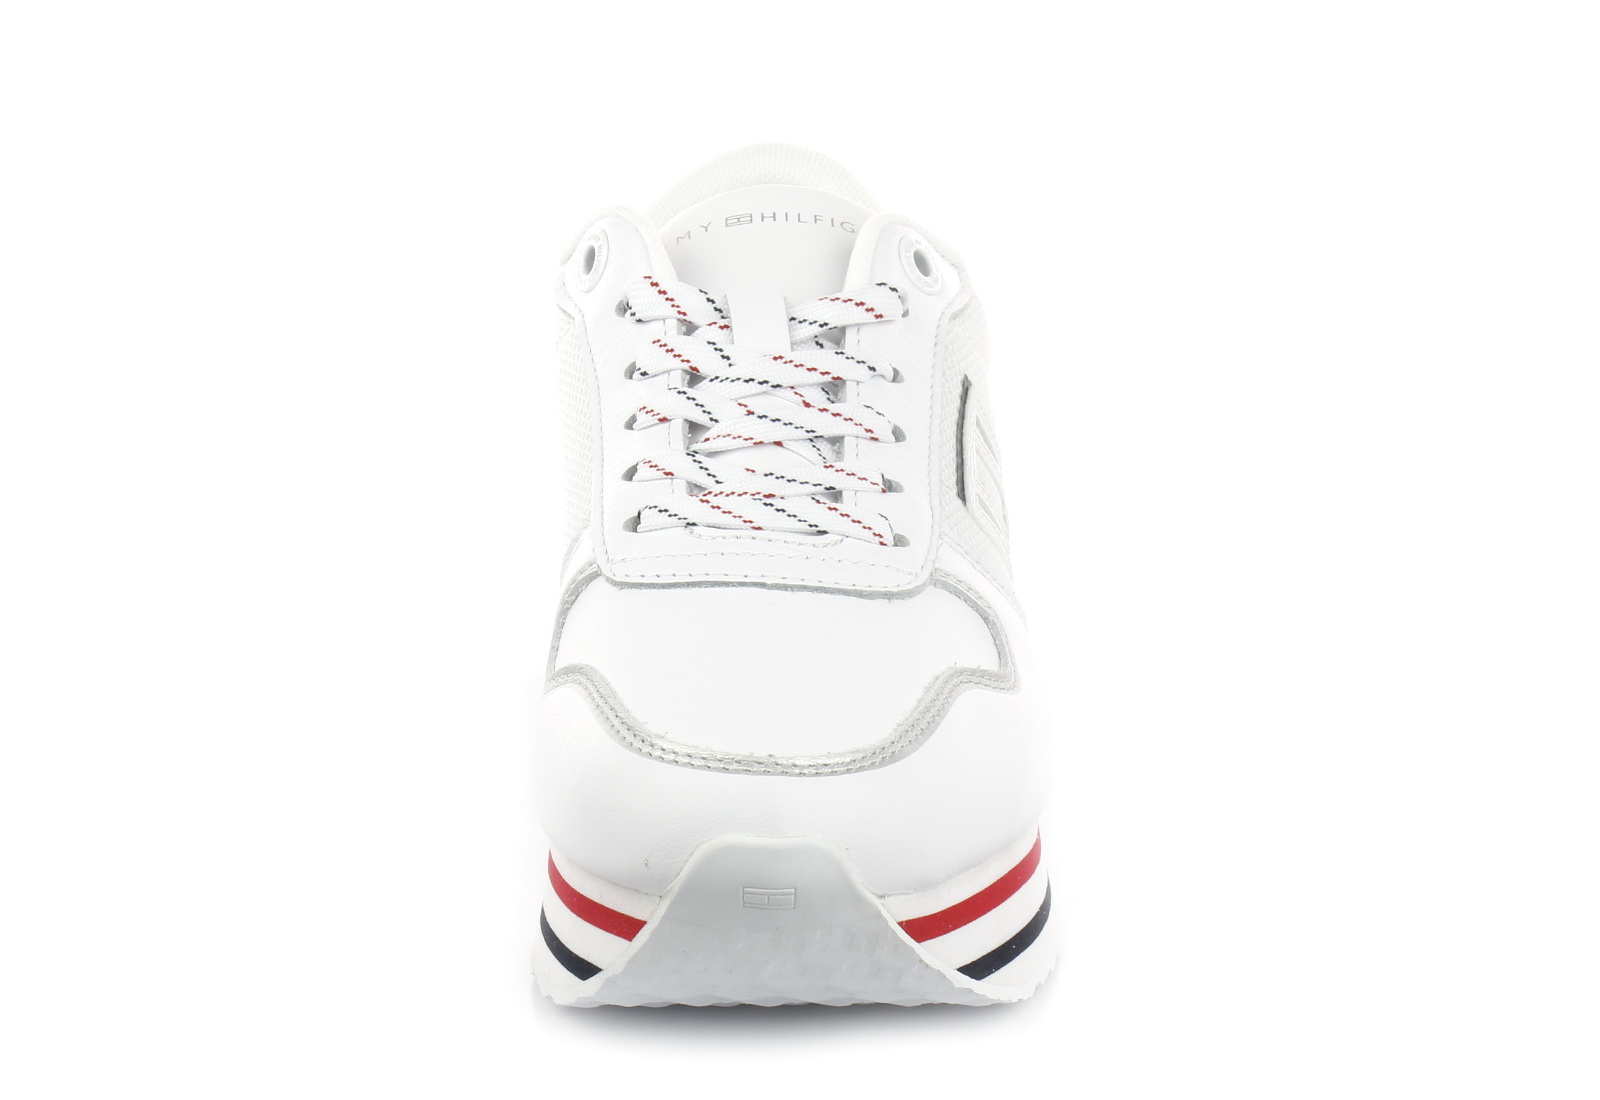 Tommy Hilfiger Sneakers - Briana 3c - FW0-6449-0GY - Online for sneakers, and boots